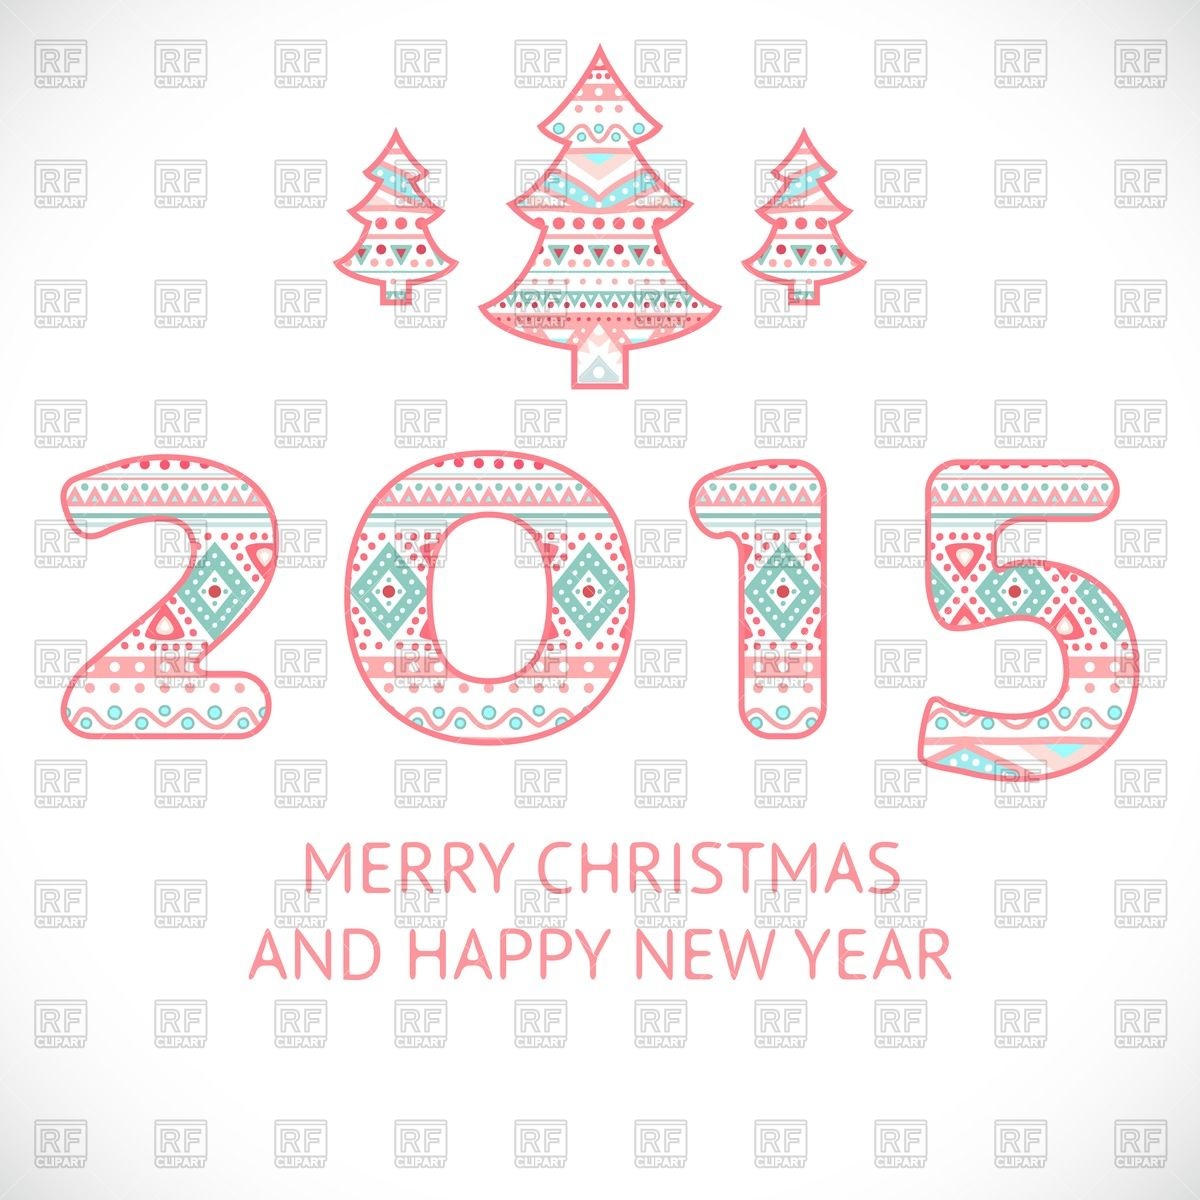 Happy New Year Greeting Card   Cute Numbers 2015 And Christmas Tree In